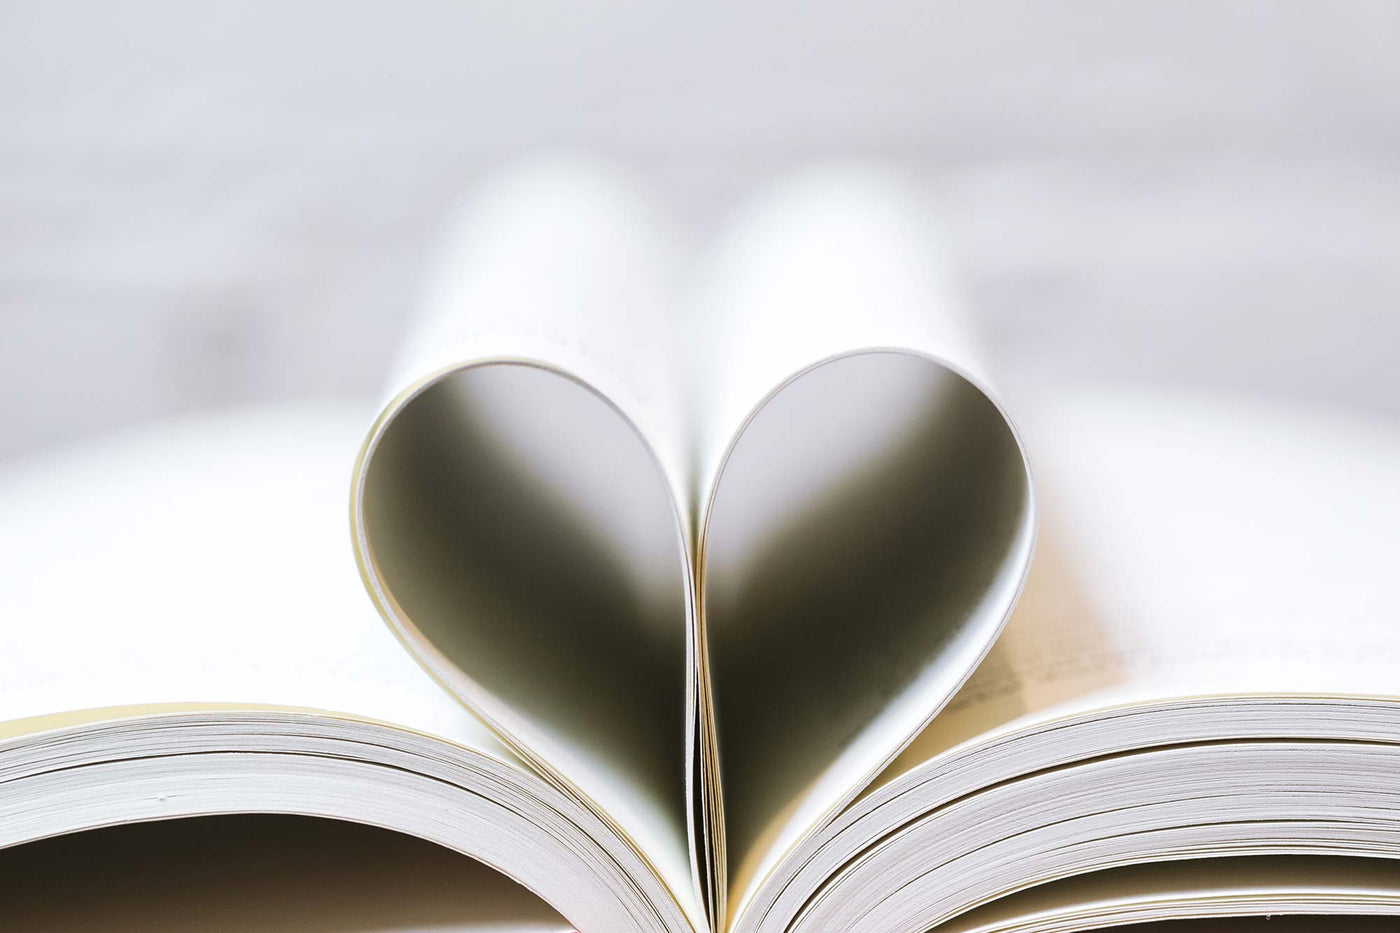 A book with the central pages tucked in to form the shape of a heart